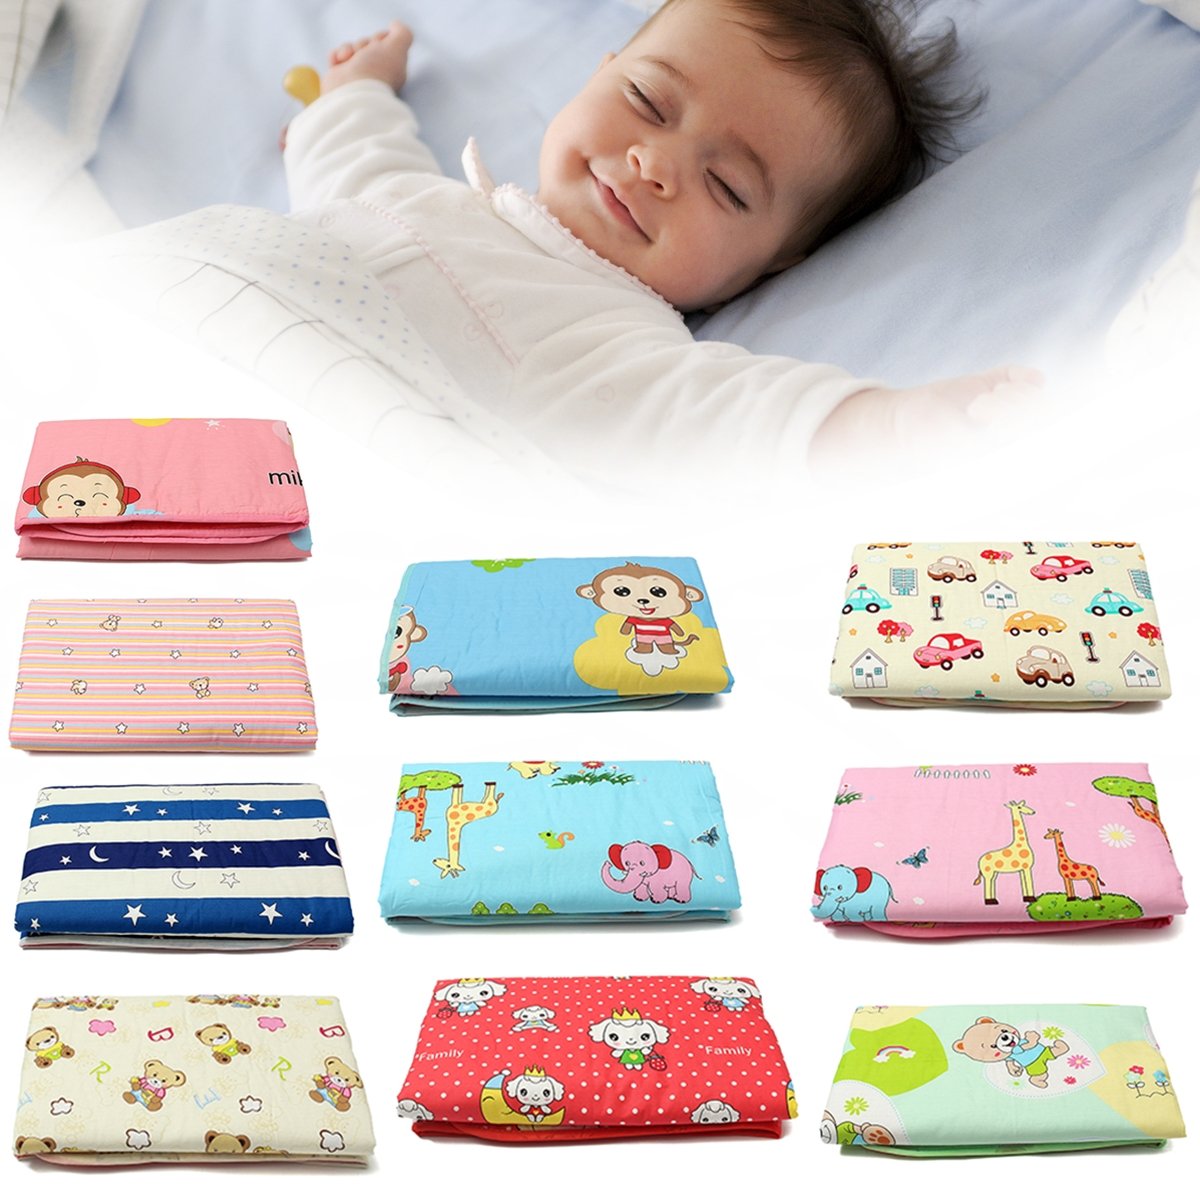 Baby Diaper Changing Pad Kid Nappy Urine Mat For Children Infant Adult 120x150cm